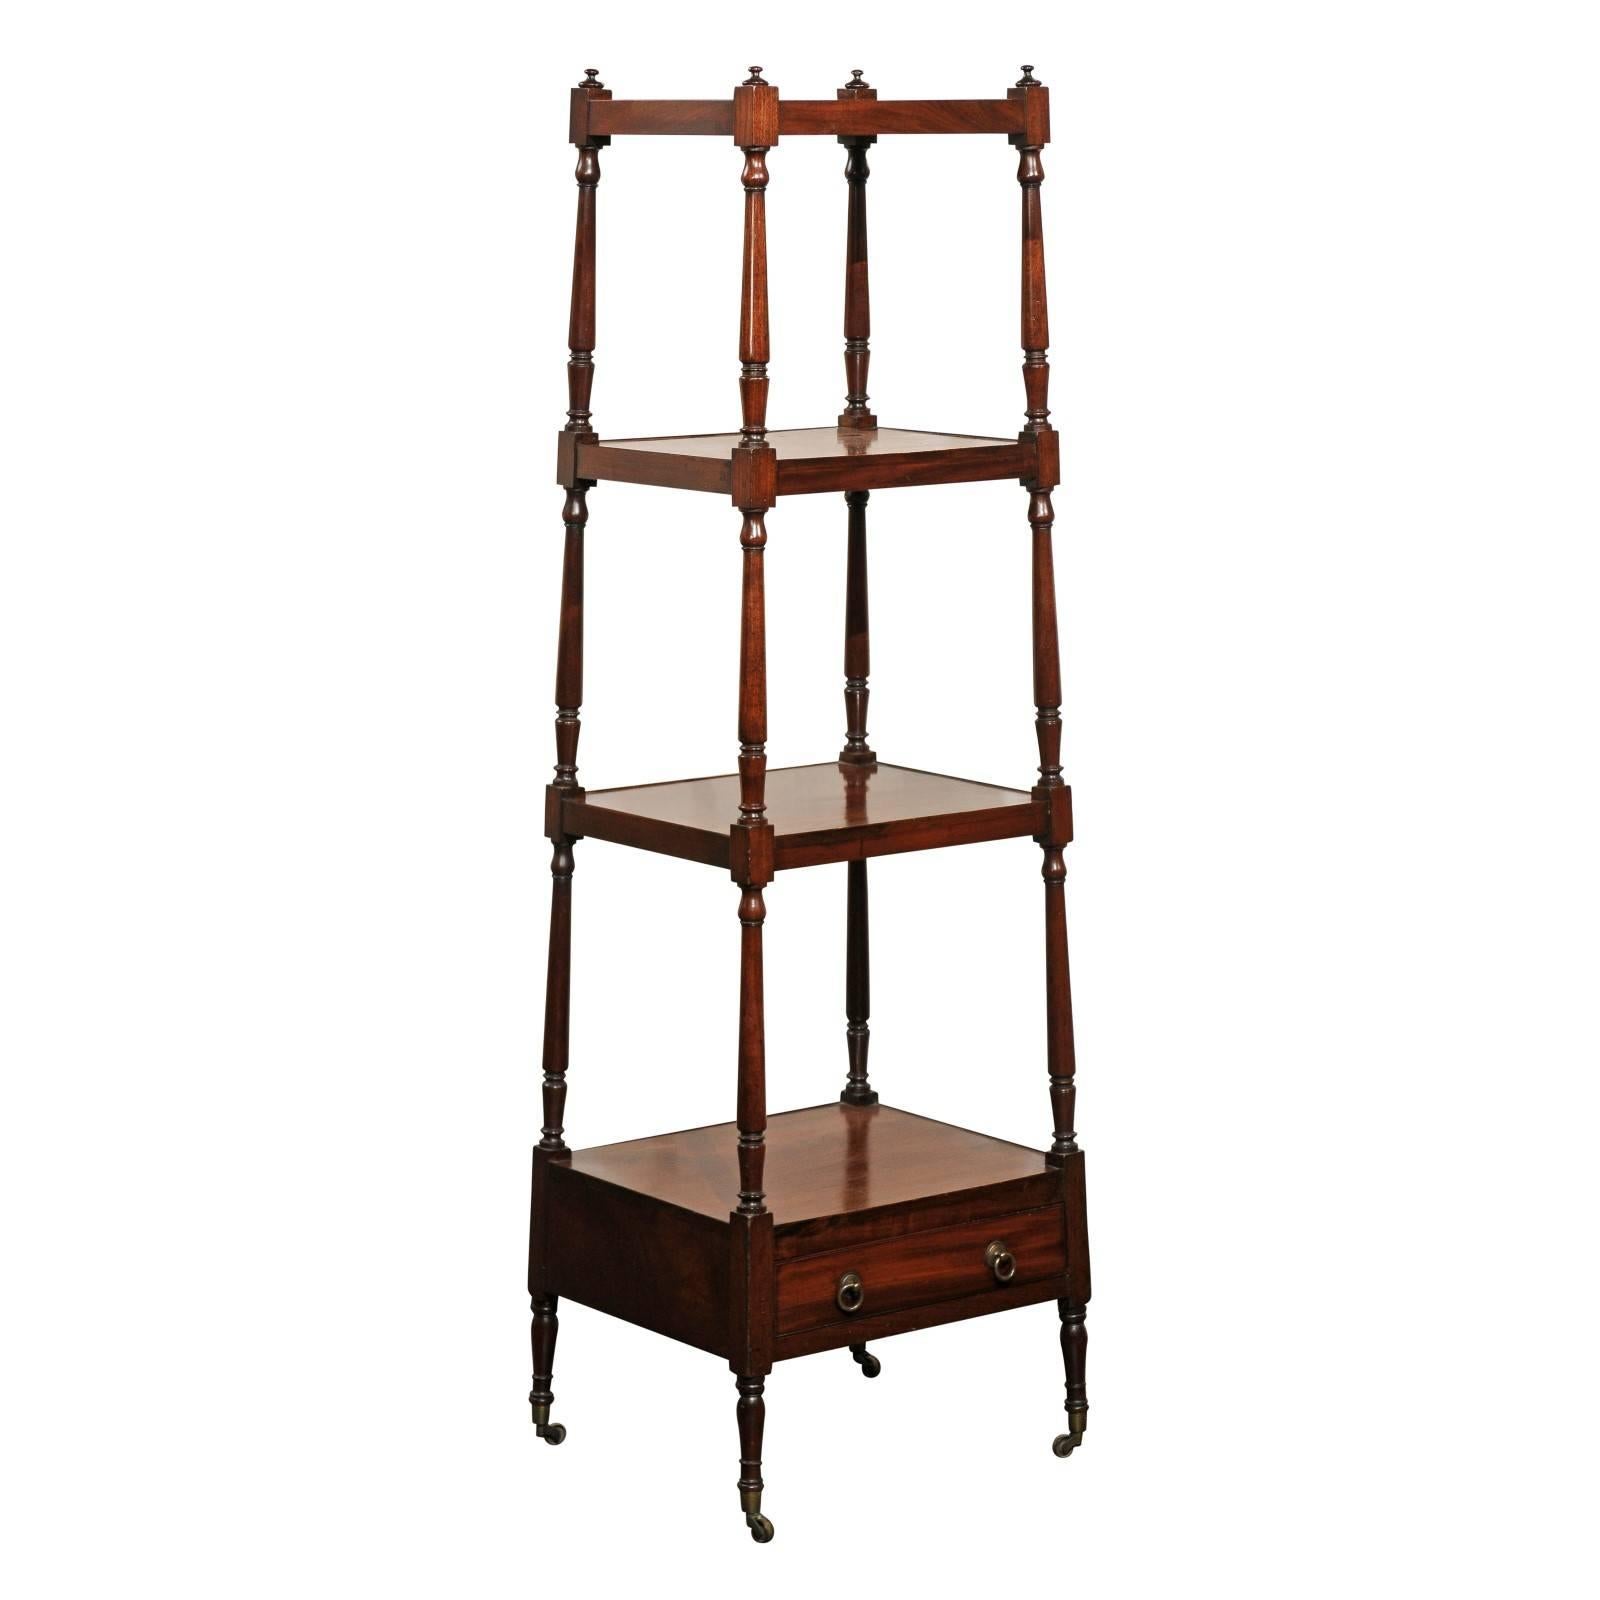 English Mahogany Trolley with Graduated Shelves from the Mid-19th Century For Sale